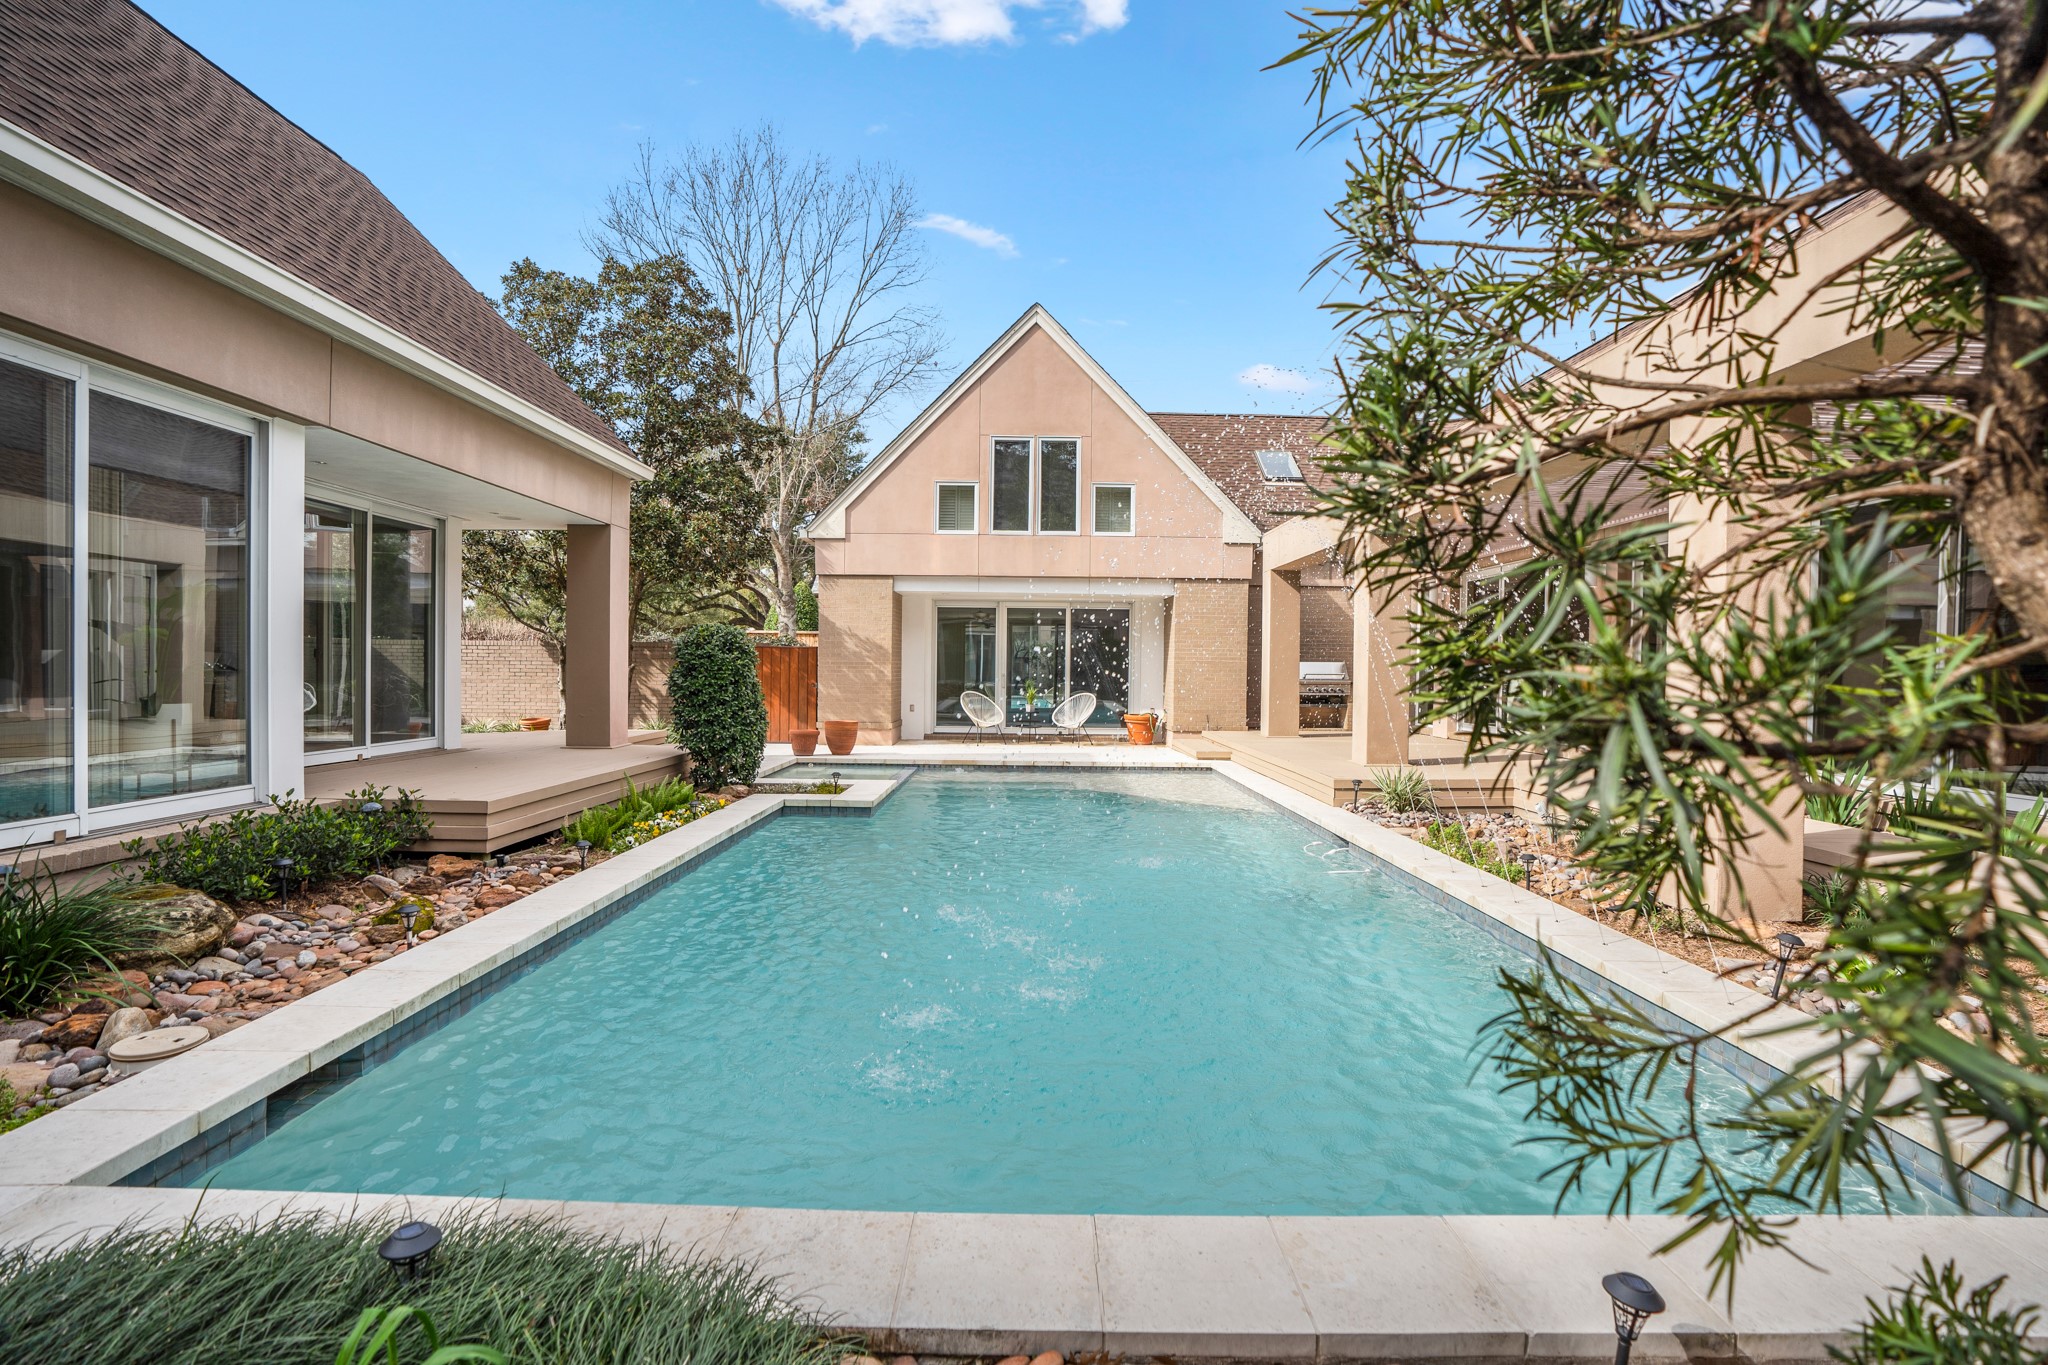 This is what your friends and family see upon entry to your home: a zen, private courtyard with a beautiful pool.